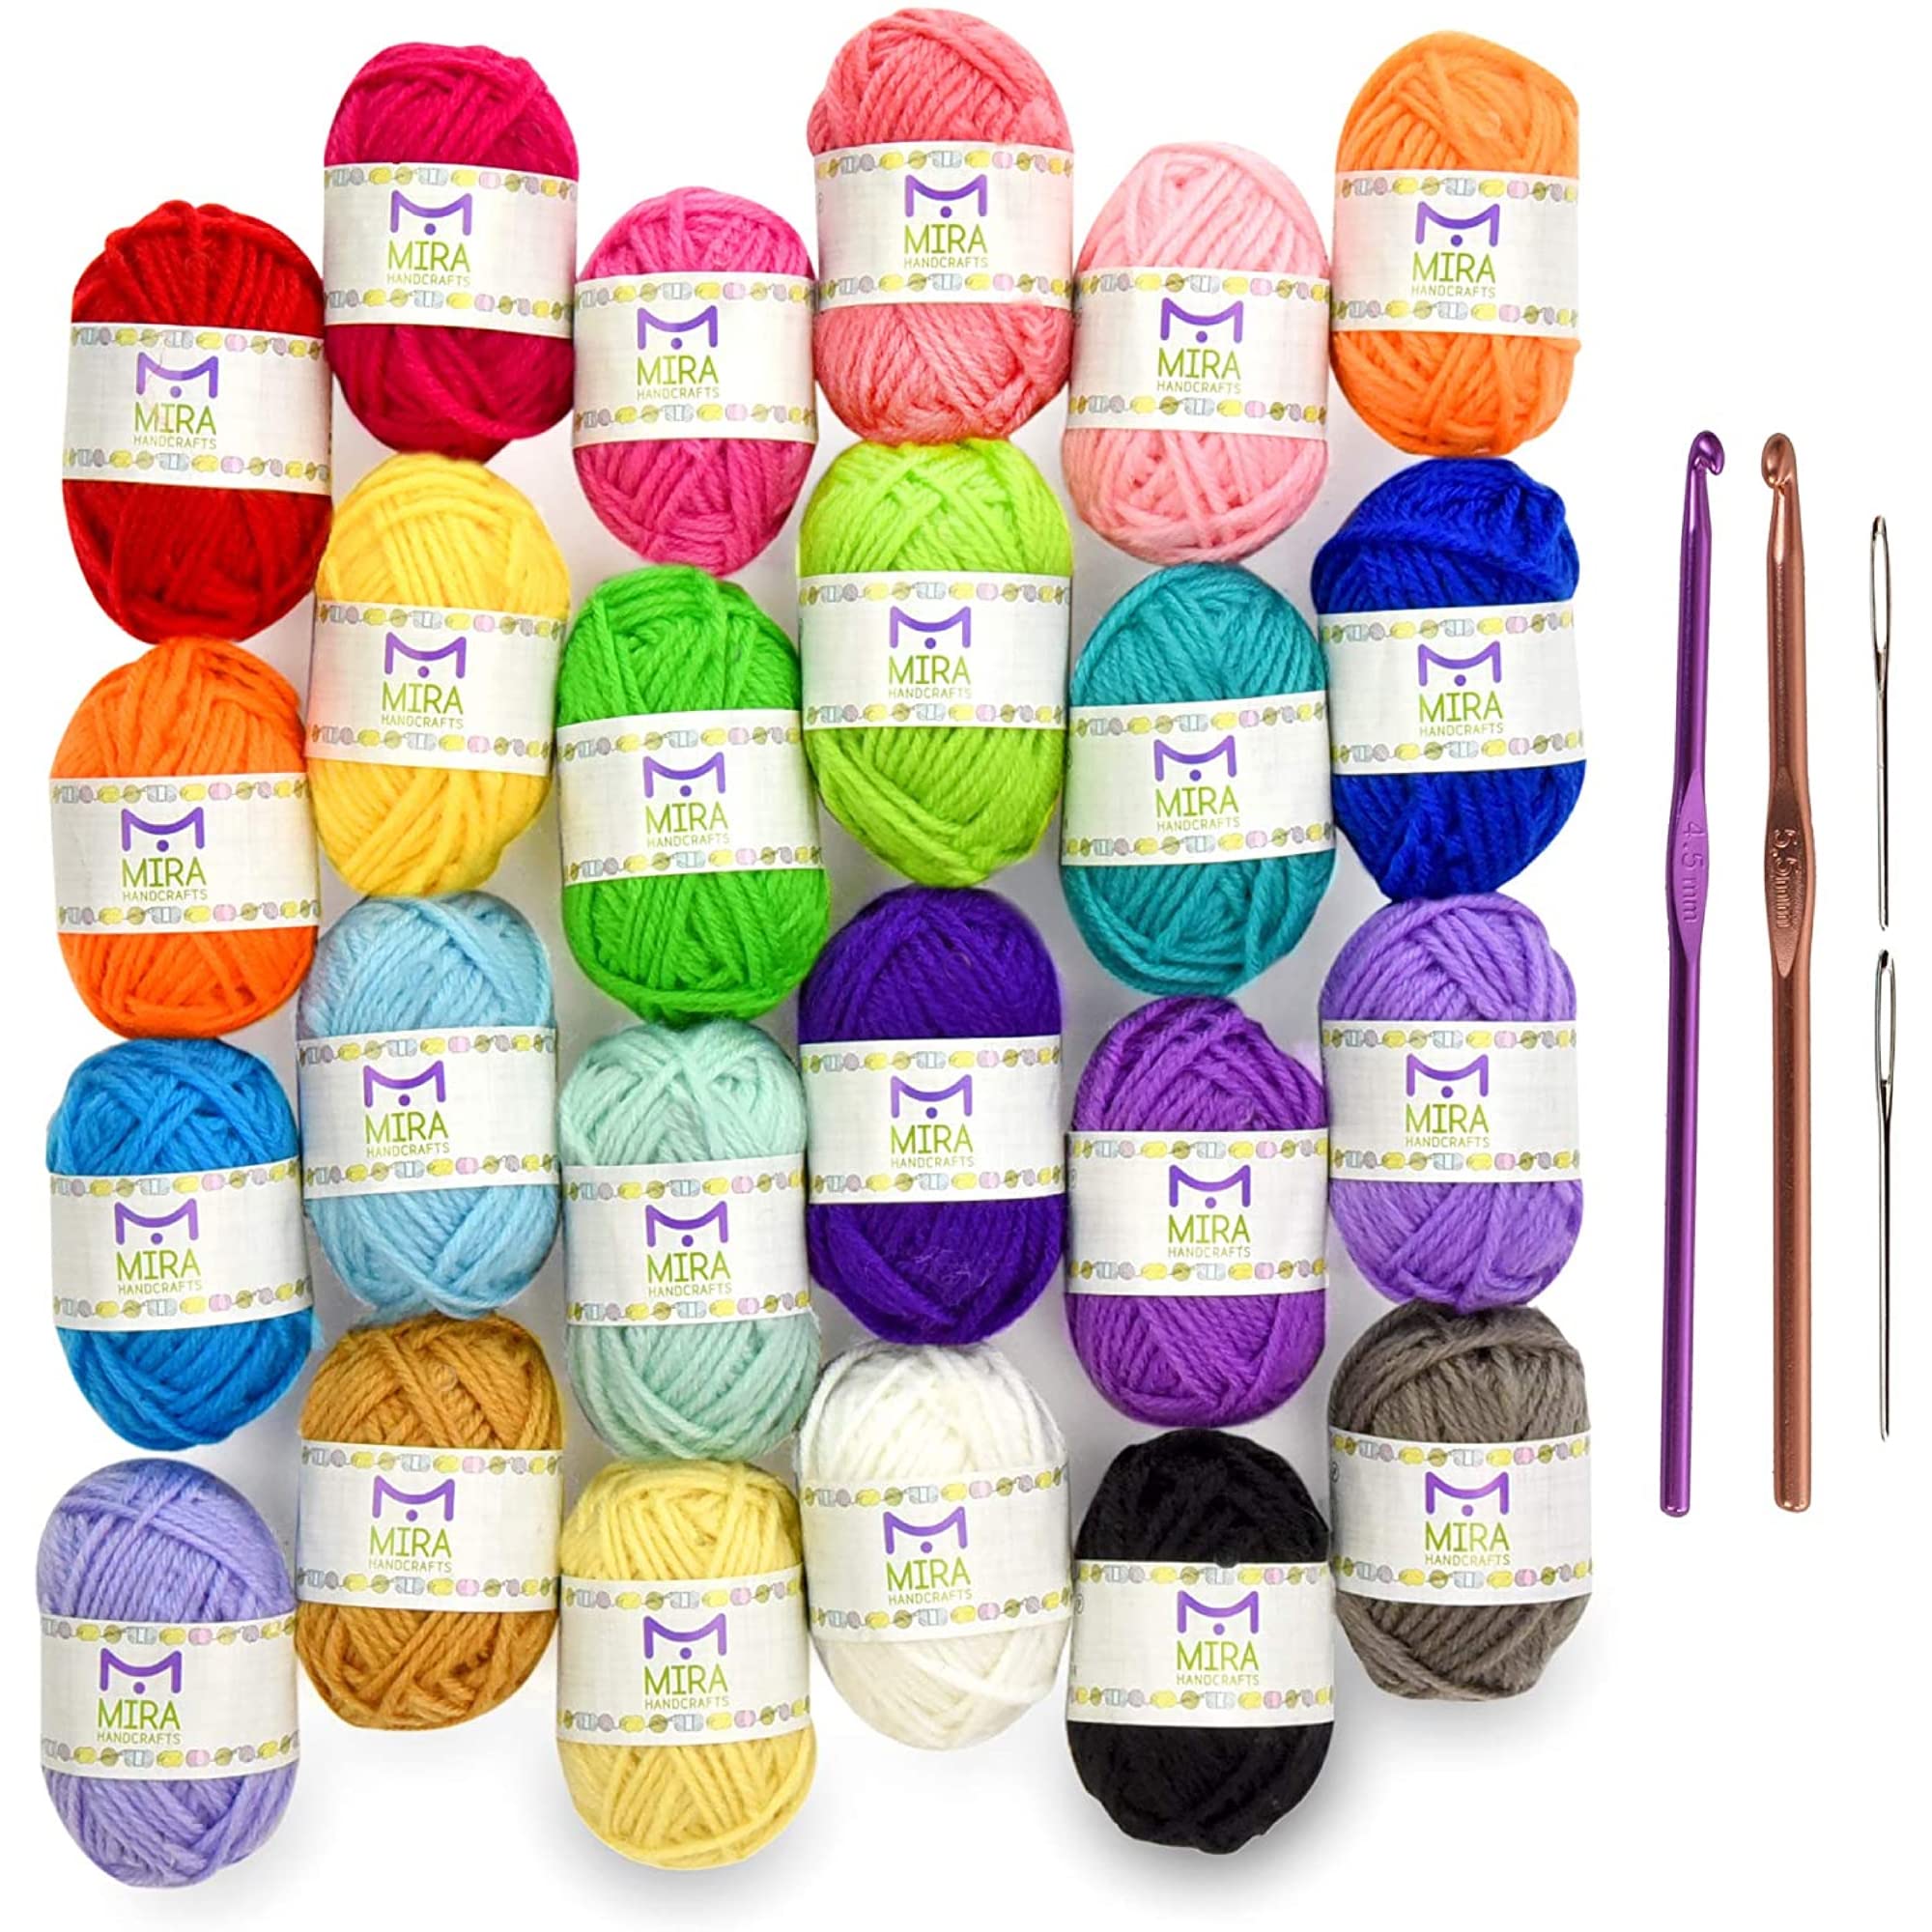 20 Acrylic Yarn Skeins - 438 Yards Multicolored Yarn in Total – Great  Crochet and Knitting Starter Kit for Colorful Craft – Assorted Colors